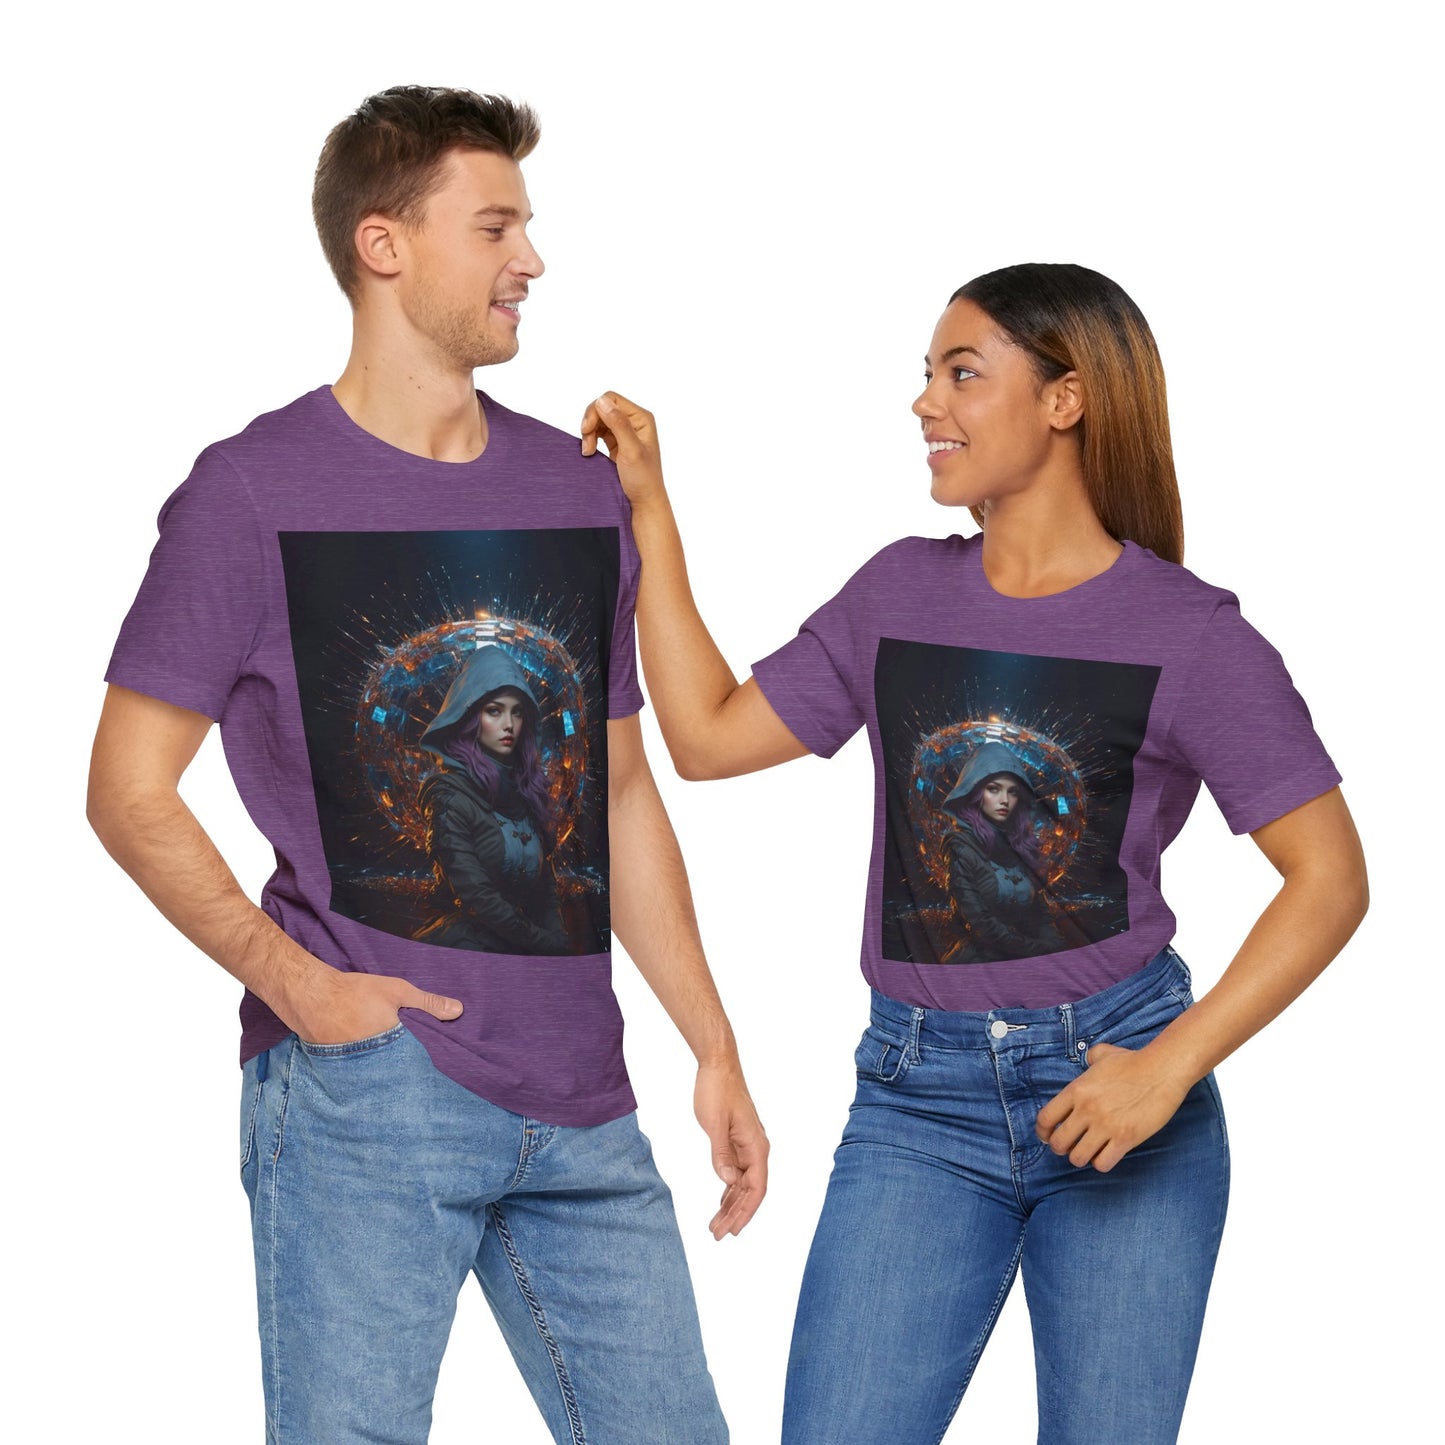 Shattered Reflections | HD Graphic | Sci-Fi | Unisex | Men's | Women's | Tee | T-Shirt